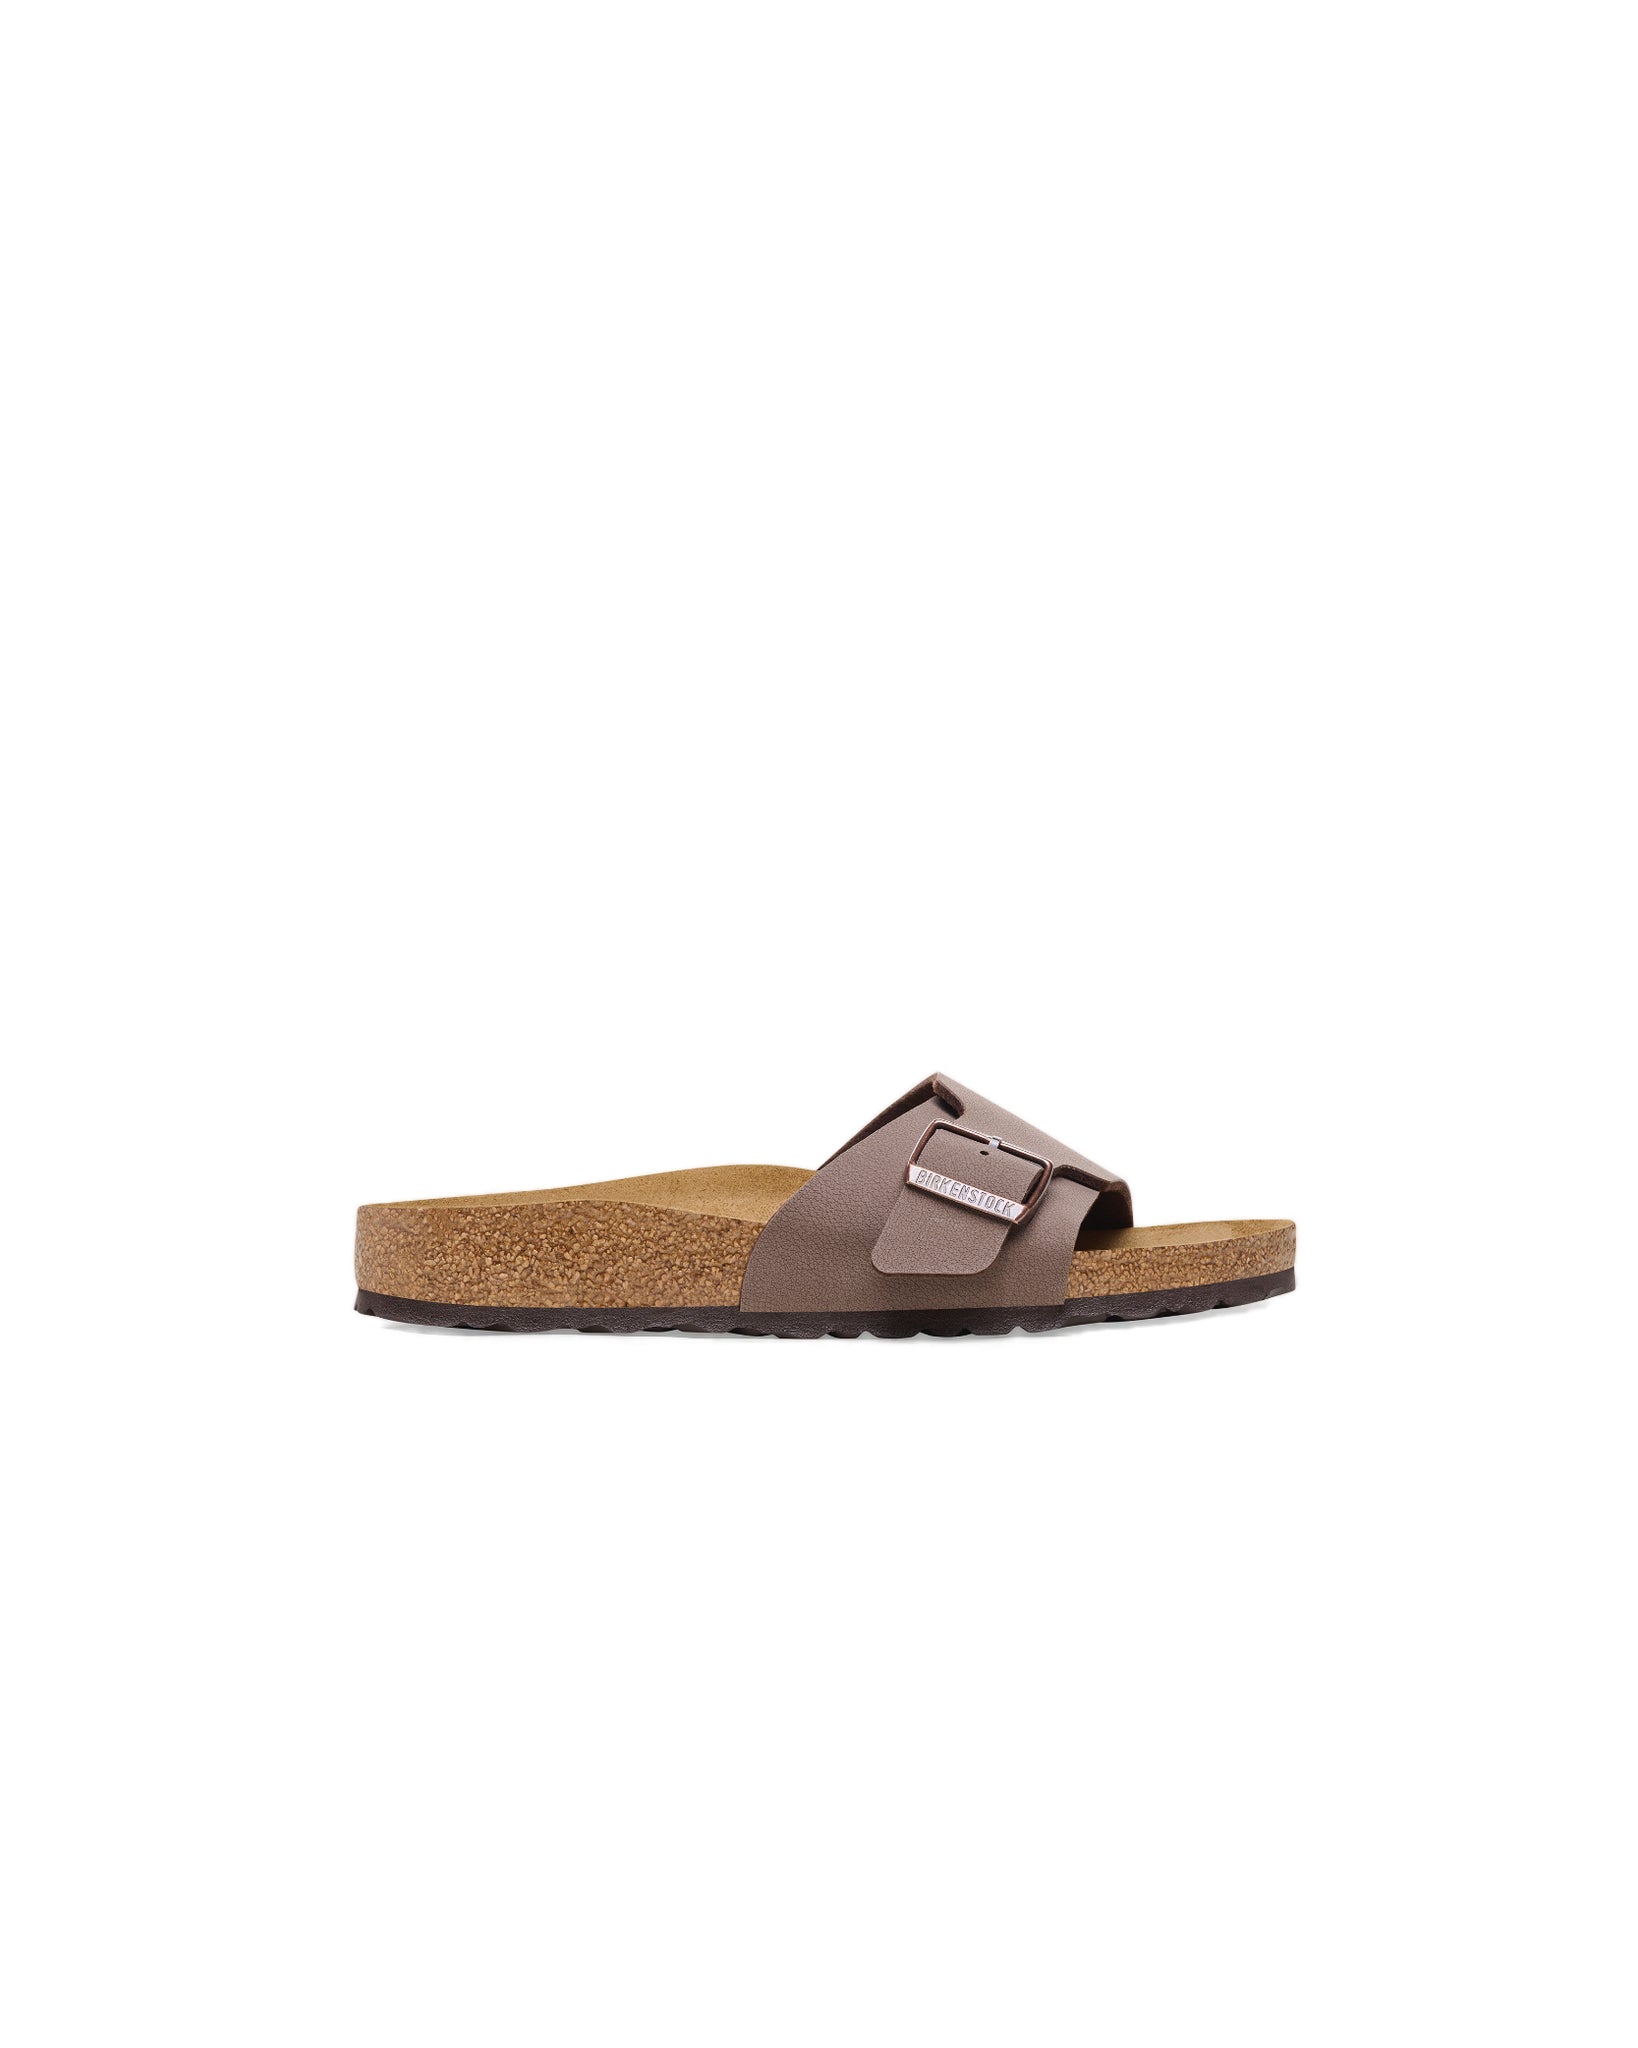 Catalina BS BirkoFlor Sandals - Mocca